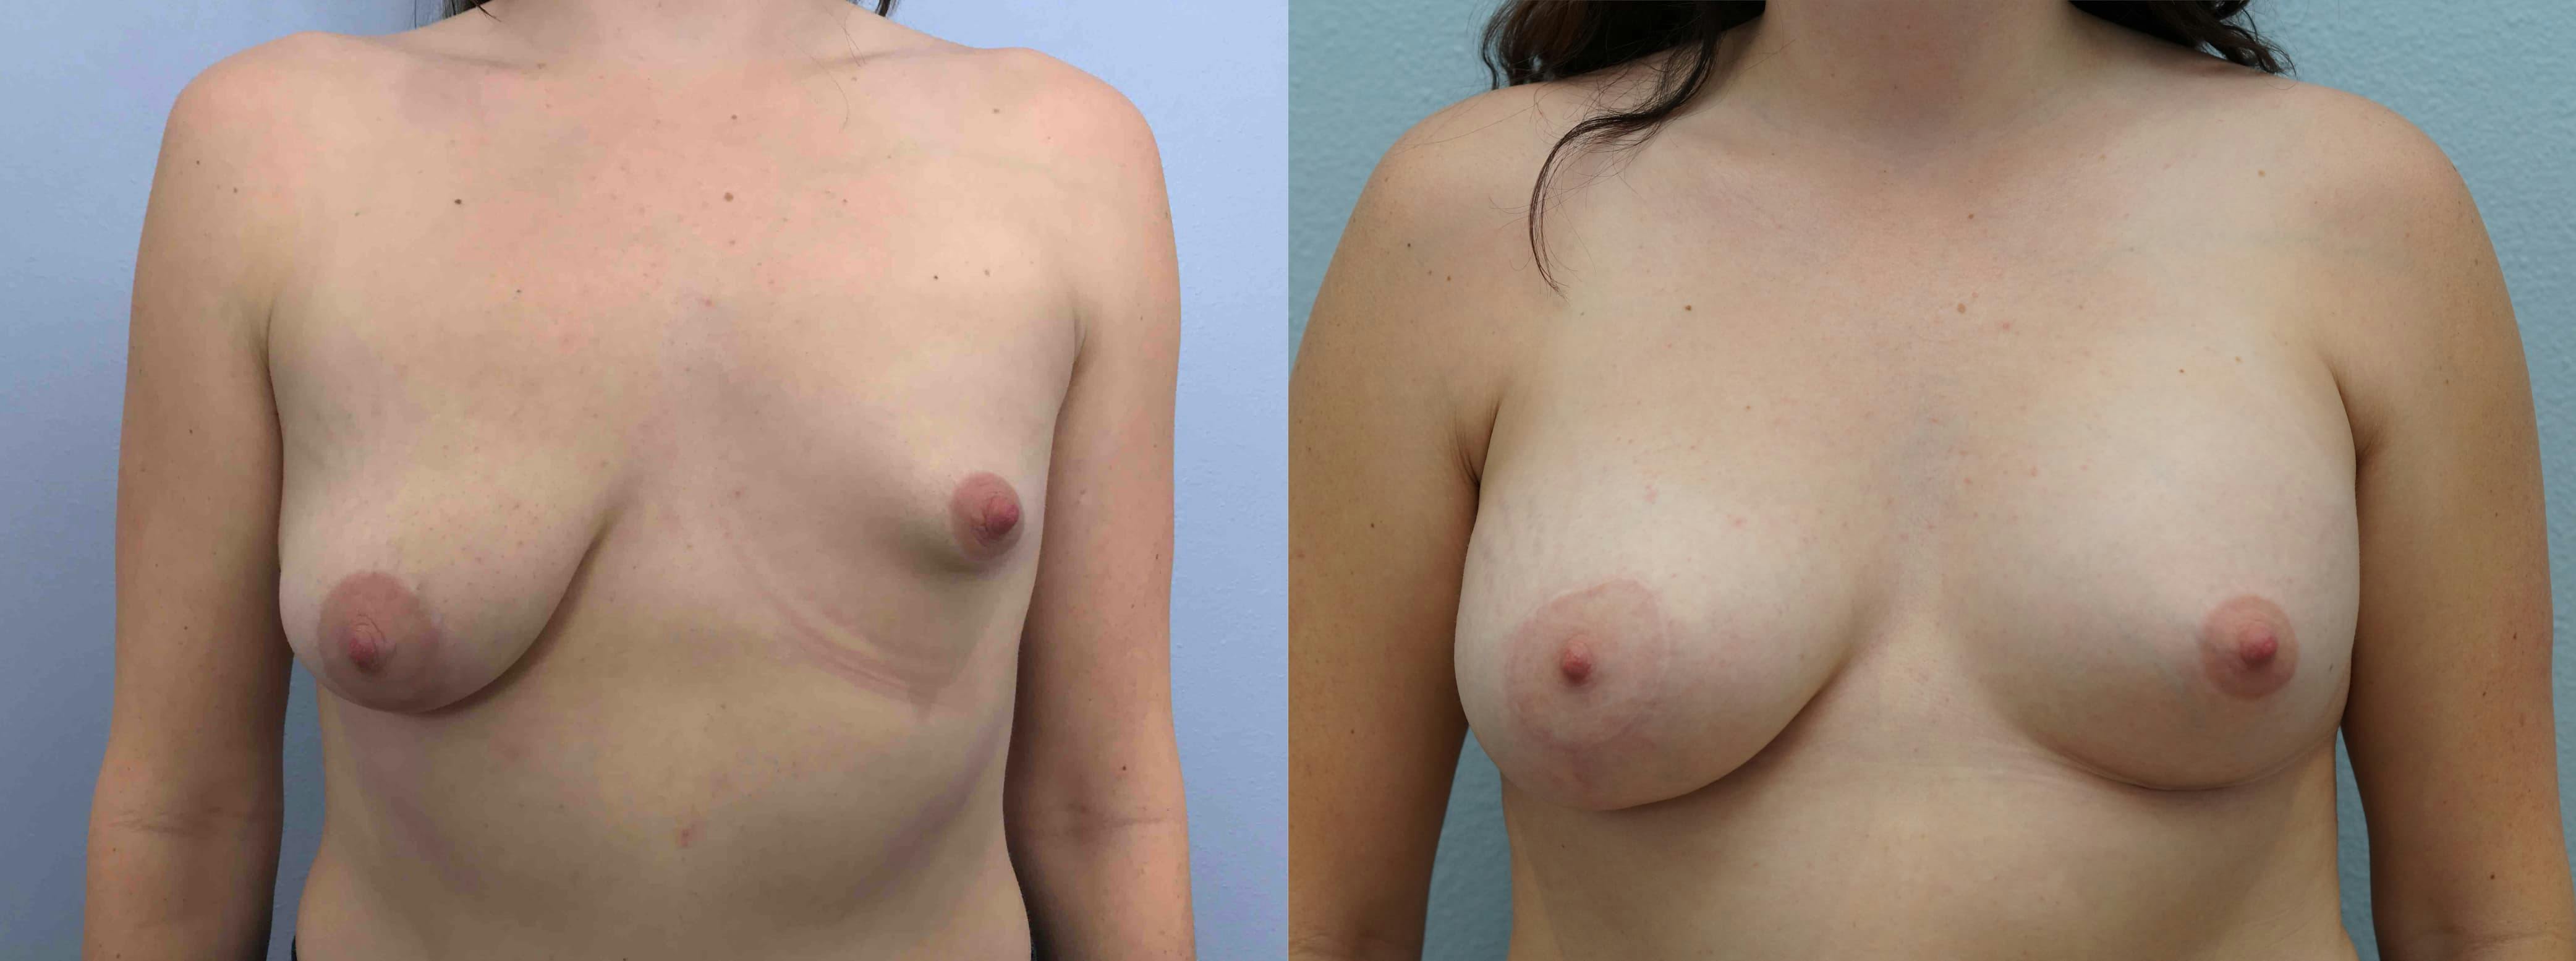 Breast Lift With Implants Gallery - Patient 75539521 - Image 1